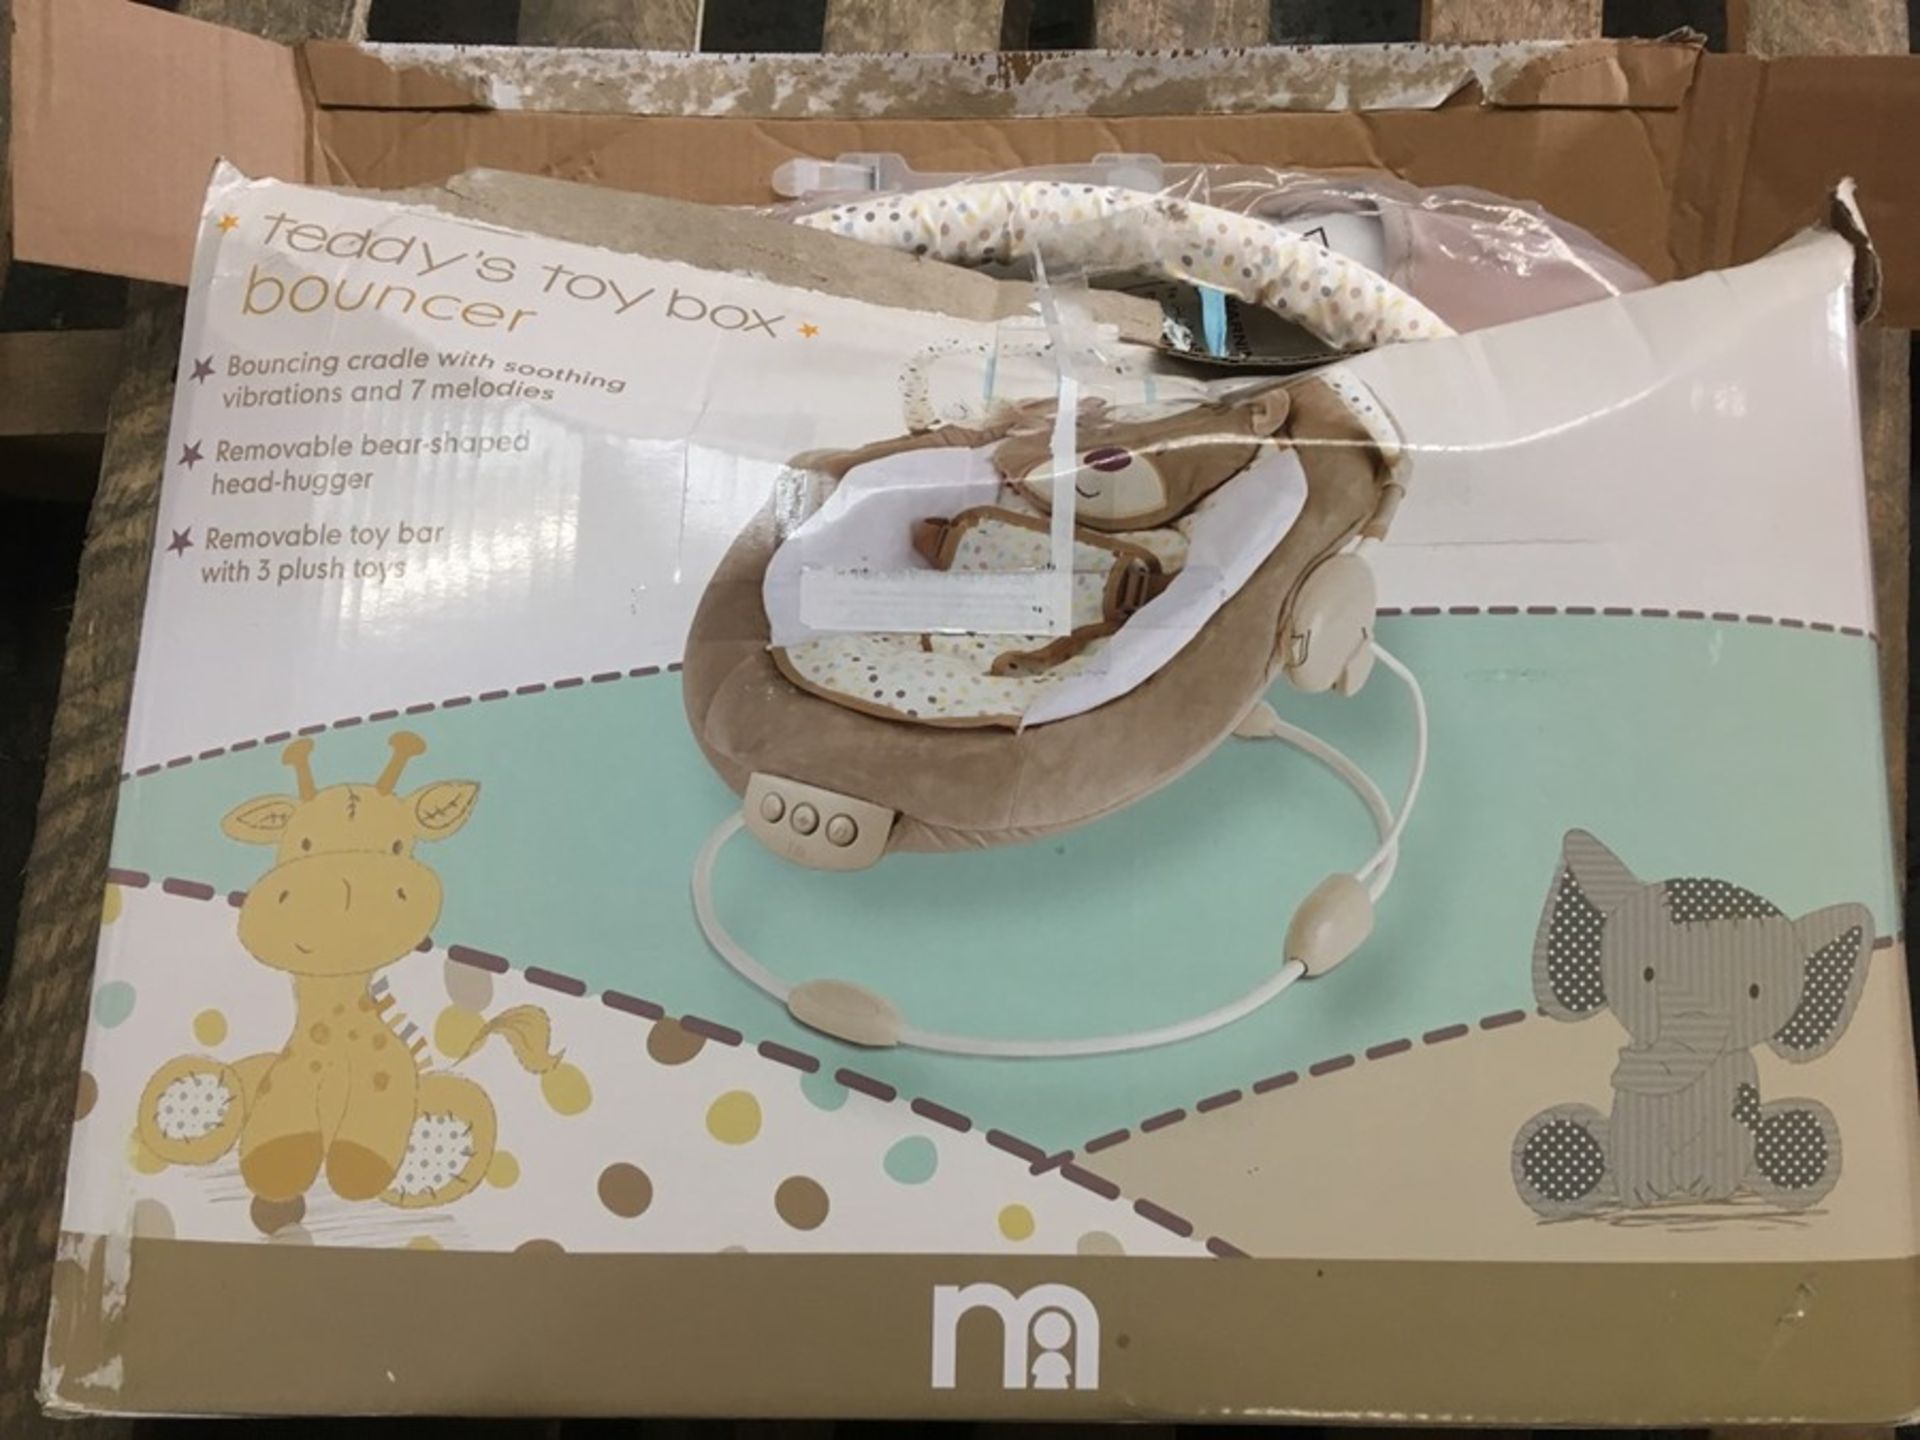 1 BOXED MOTHERCARE BABY BOUNCER - TEDDY'S TOY BOX / RRP £60.00 (PUBLIC VIEWING AVAILABLE)